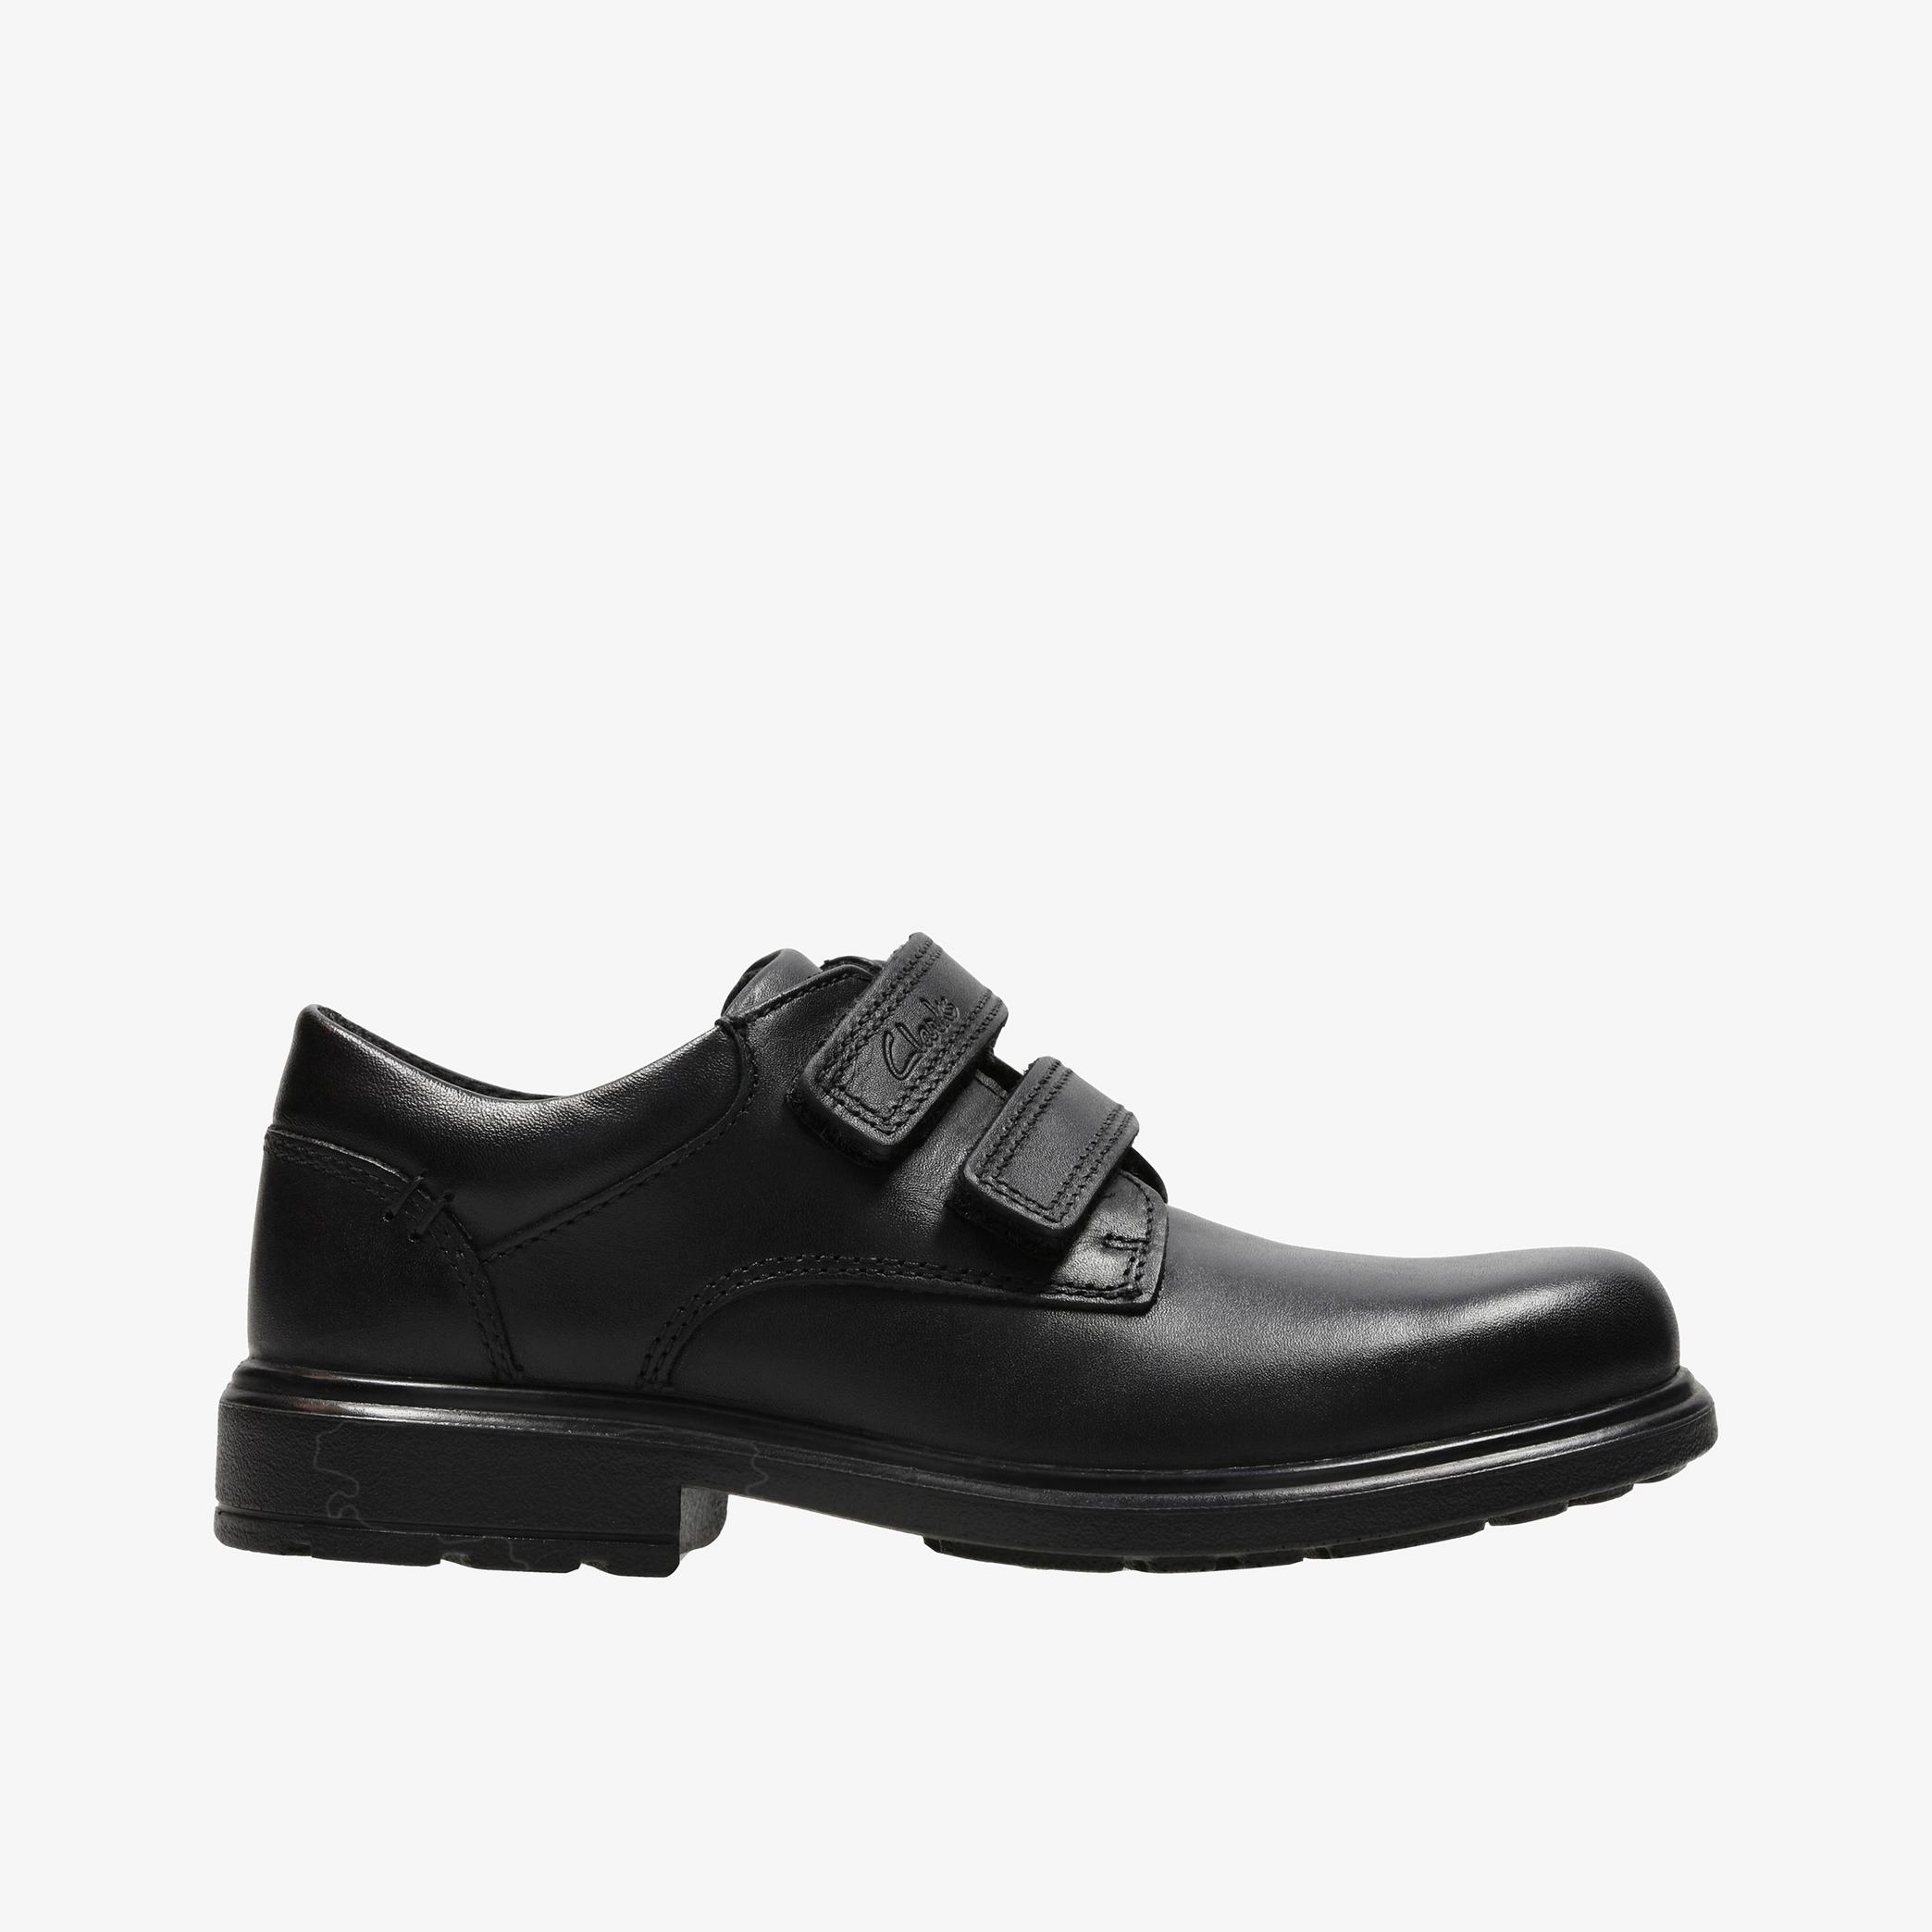 BOYS Remi Pace kid Black Leather Shoes | Clarks Outlet